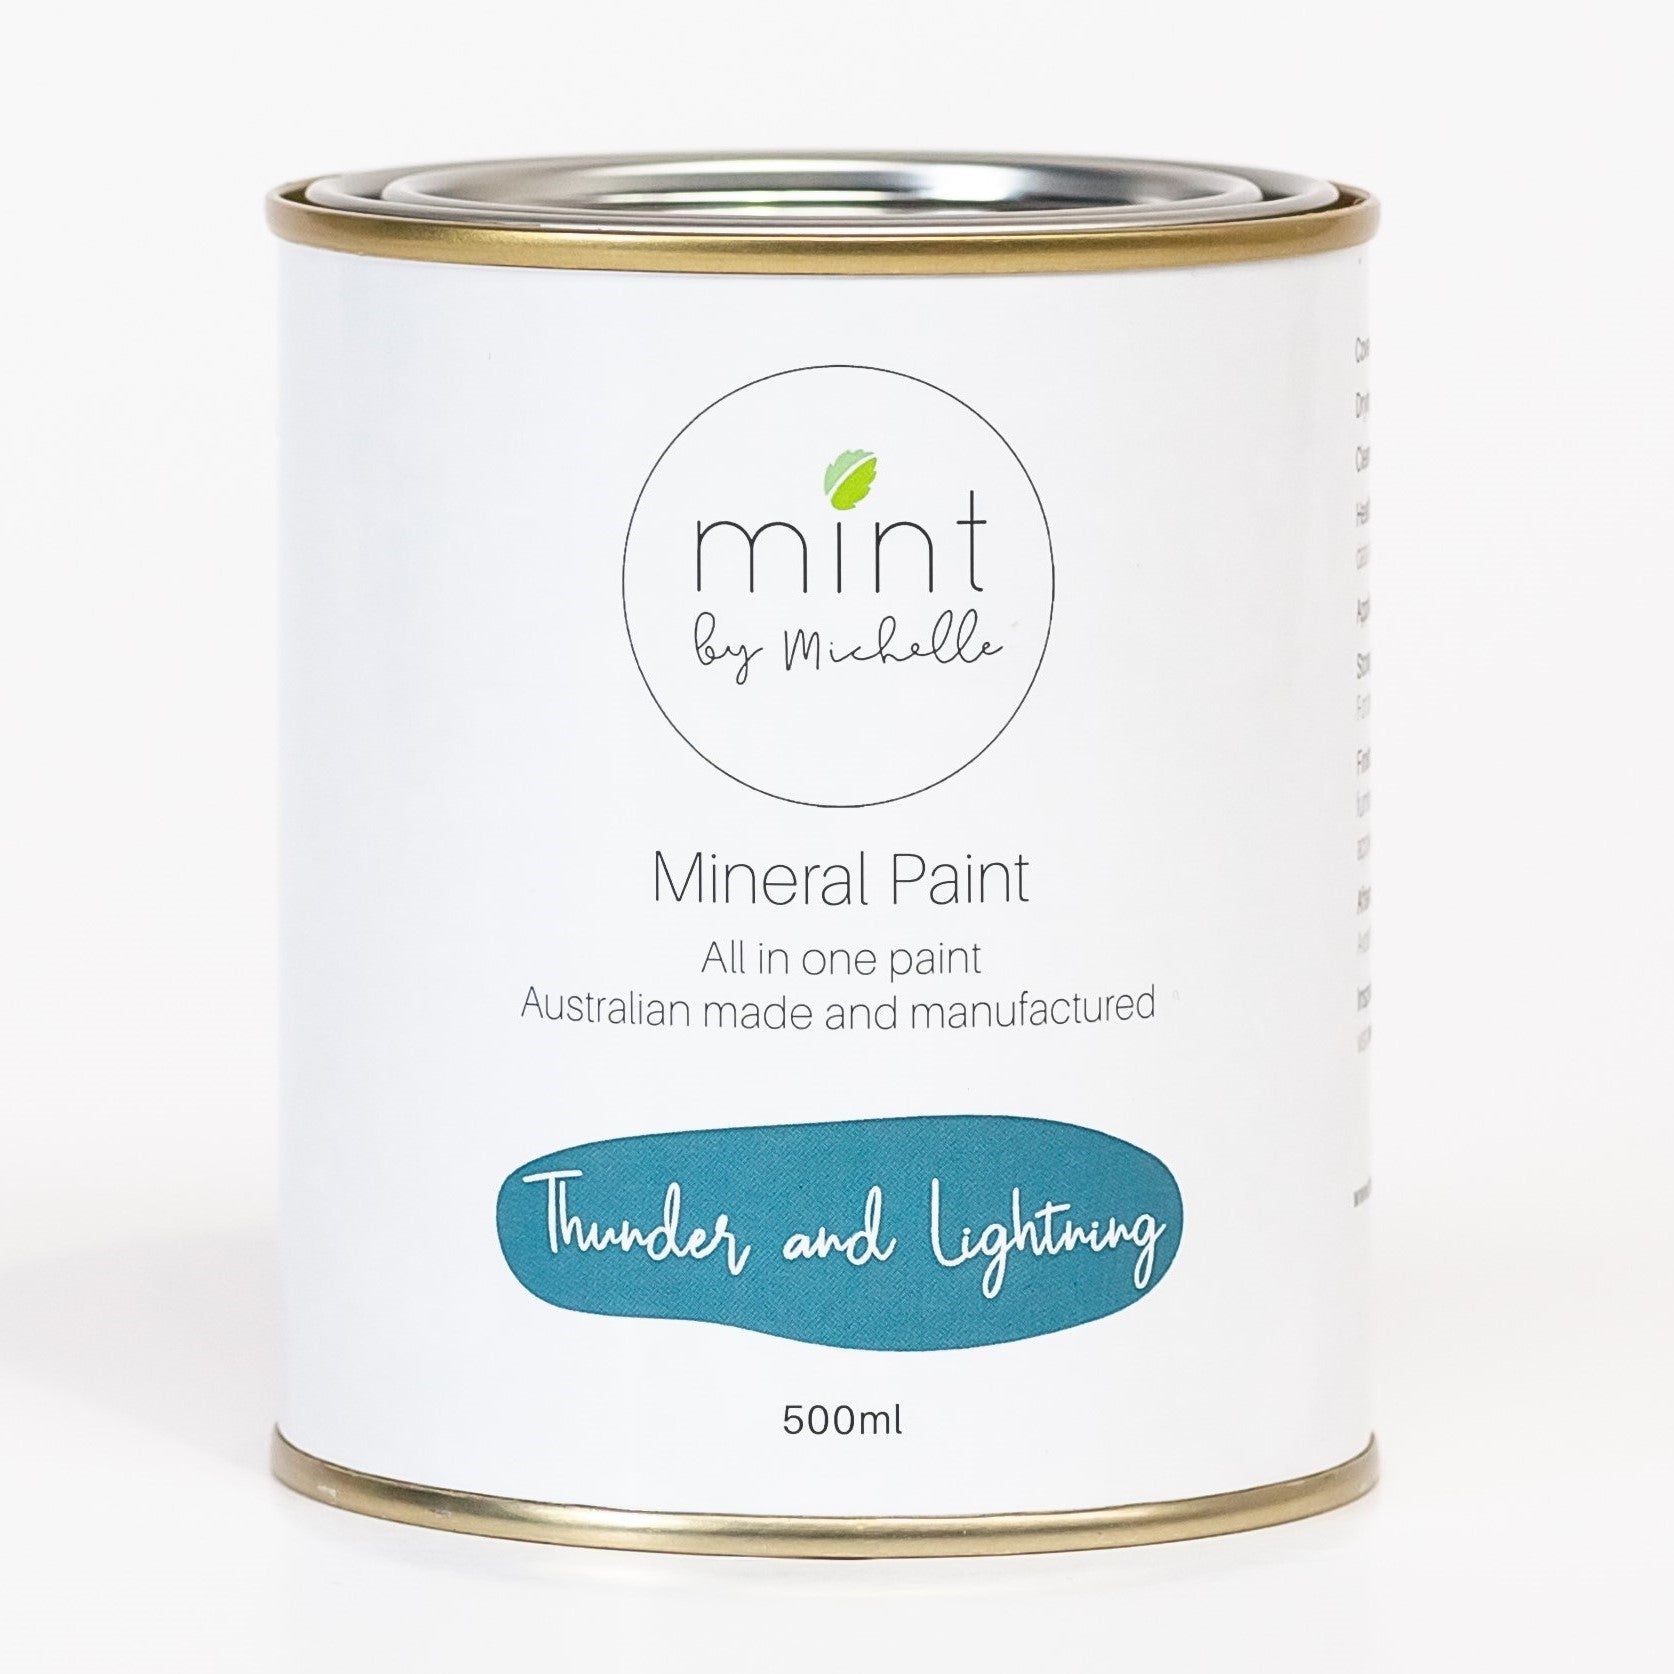 Mint by Michelle Mineral Paint Thunder and Lightning